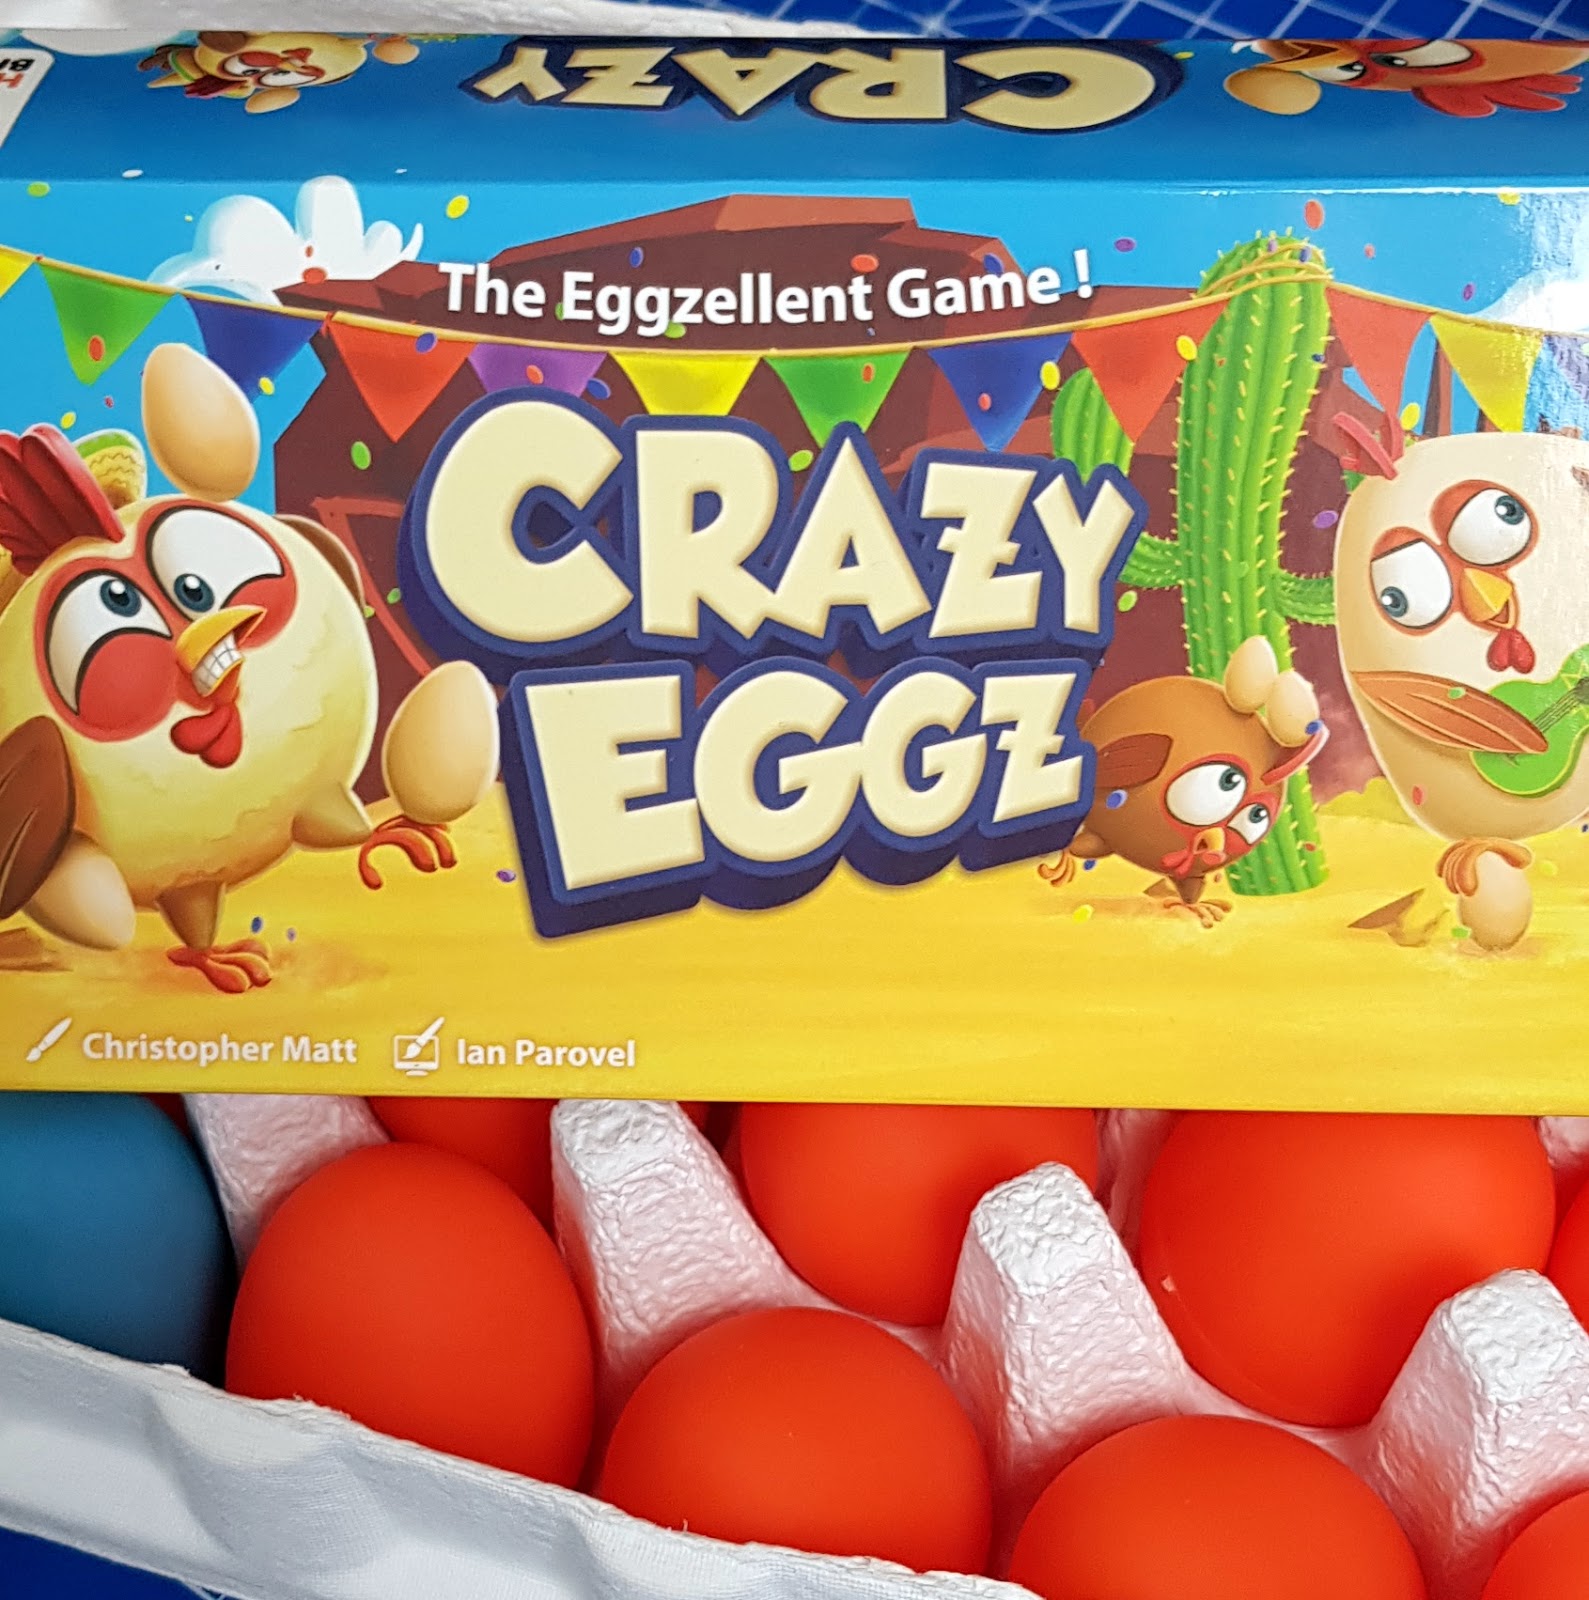 The Brick Castle: Crazy Eggz Family Game Review (Age 7+) Sent by Asmodee